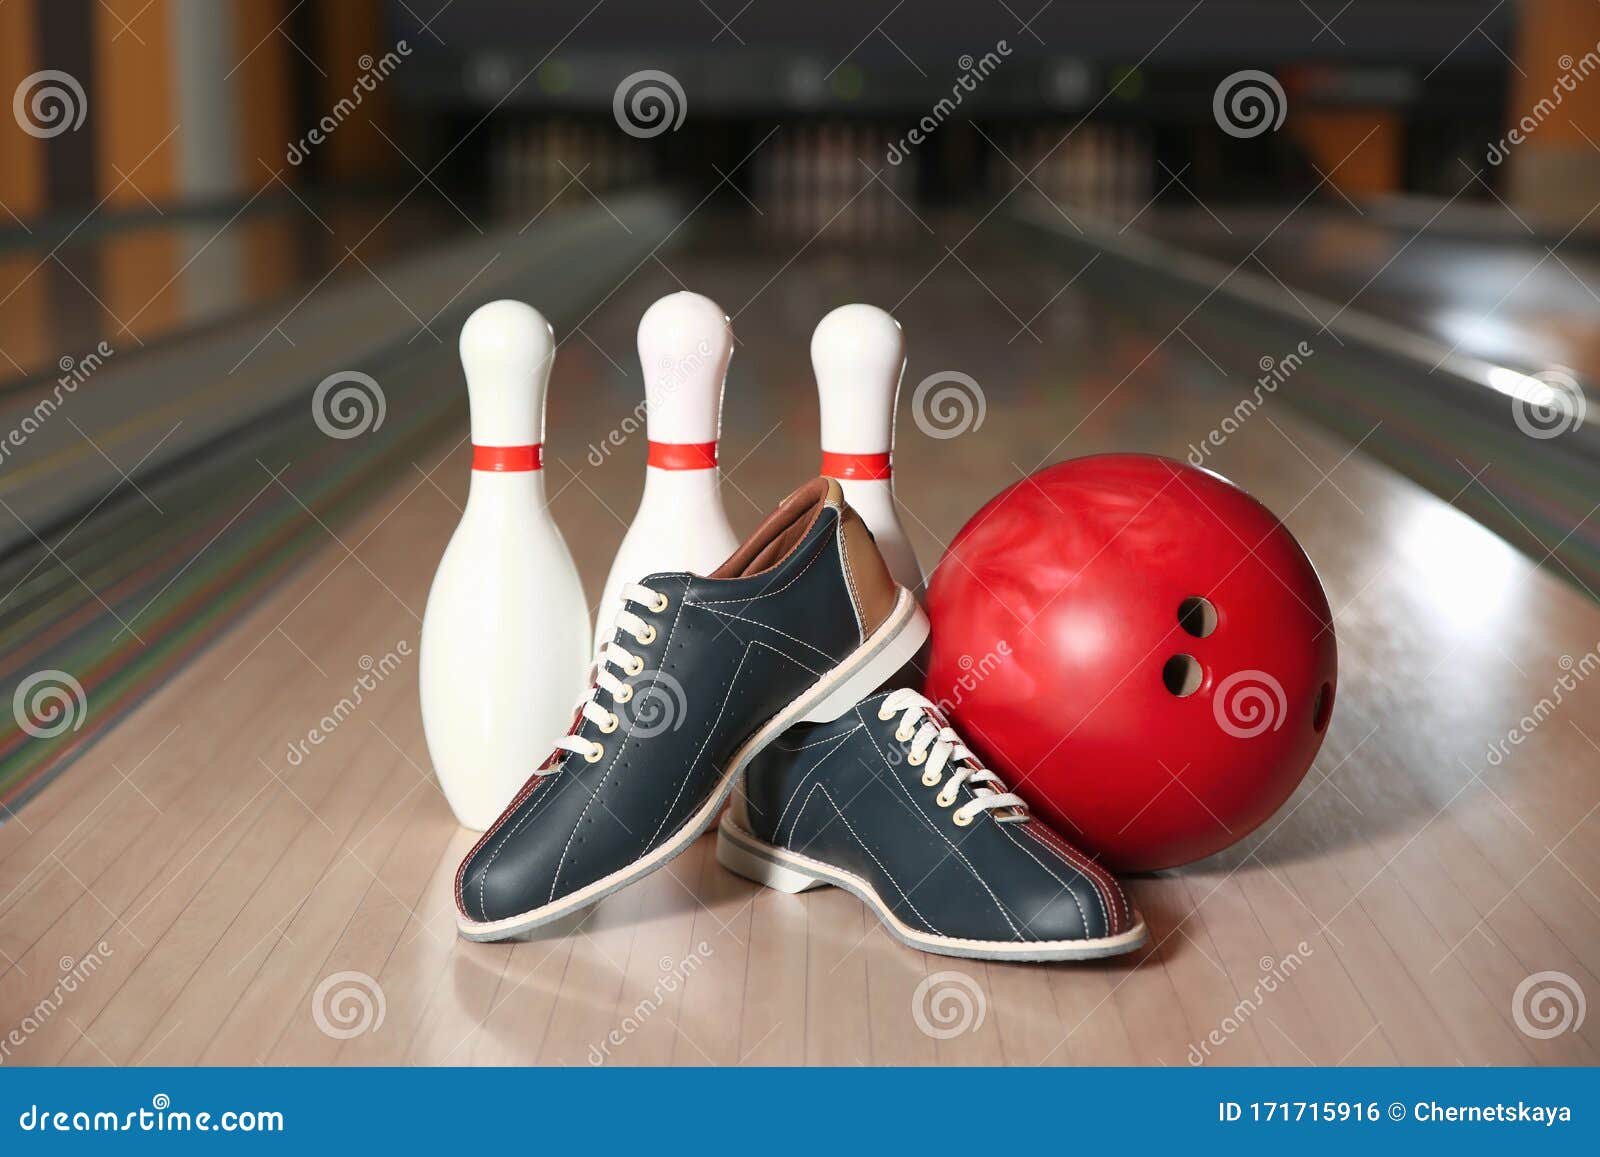 Shoes, Pins and Ball on Bowling Lane in Club Stock Photo - Image